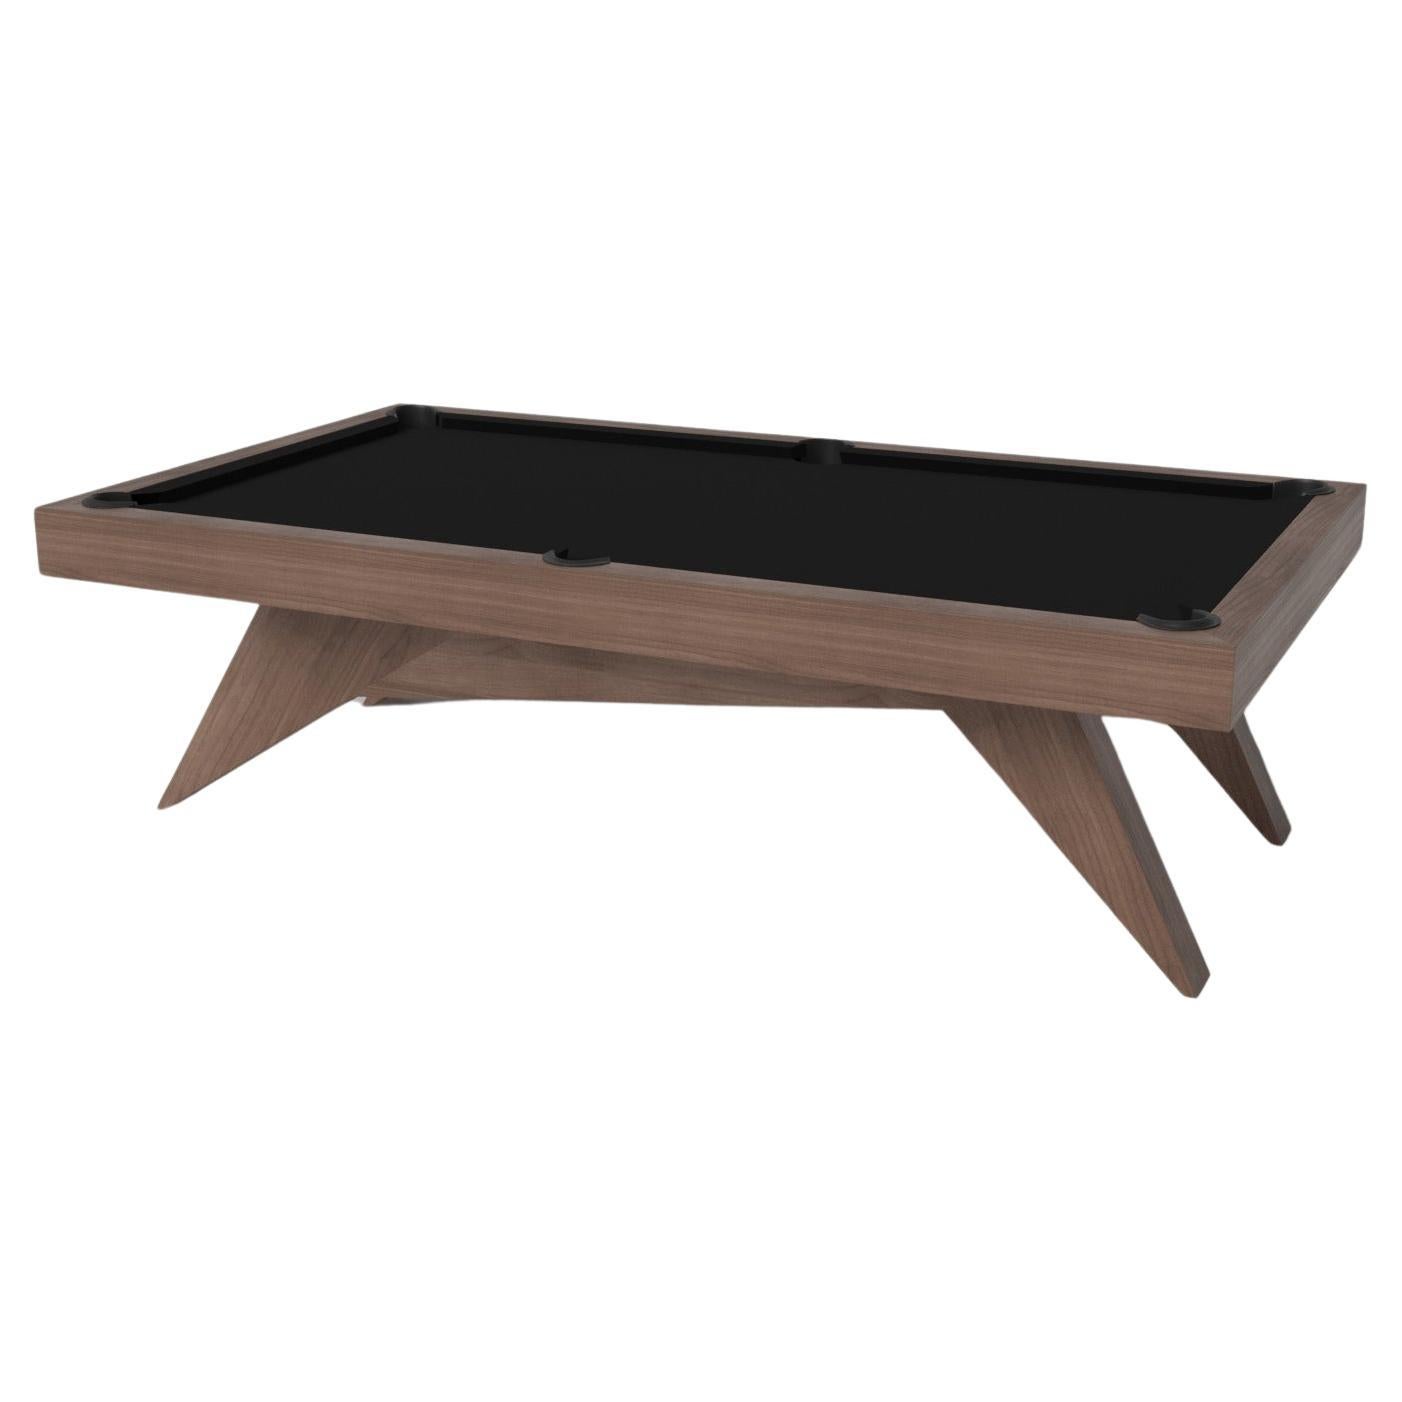 Elevate Customs Mantis Pool Table / Solid Walnut Wood in 9' - Made in USA For Sale